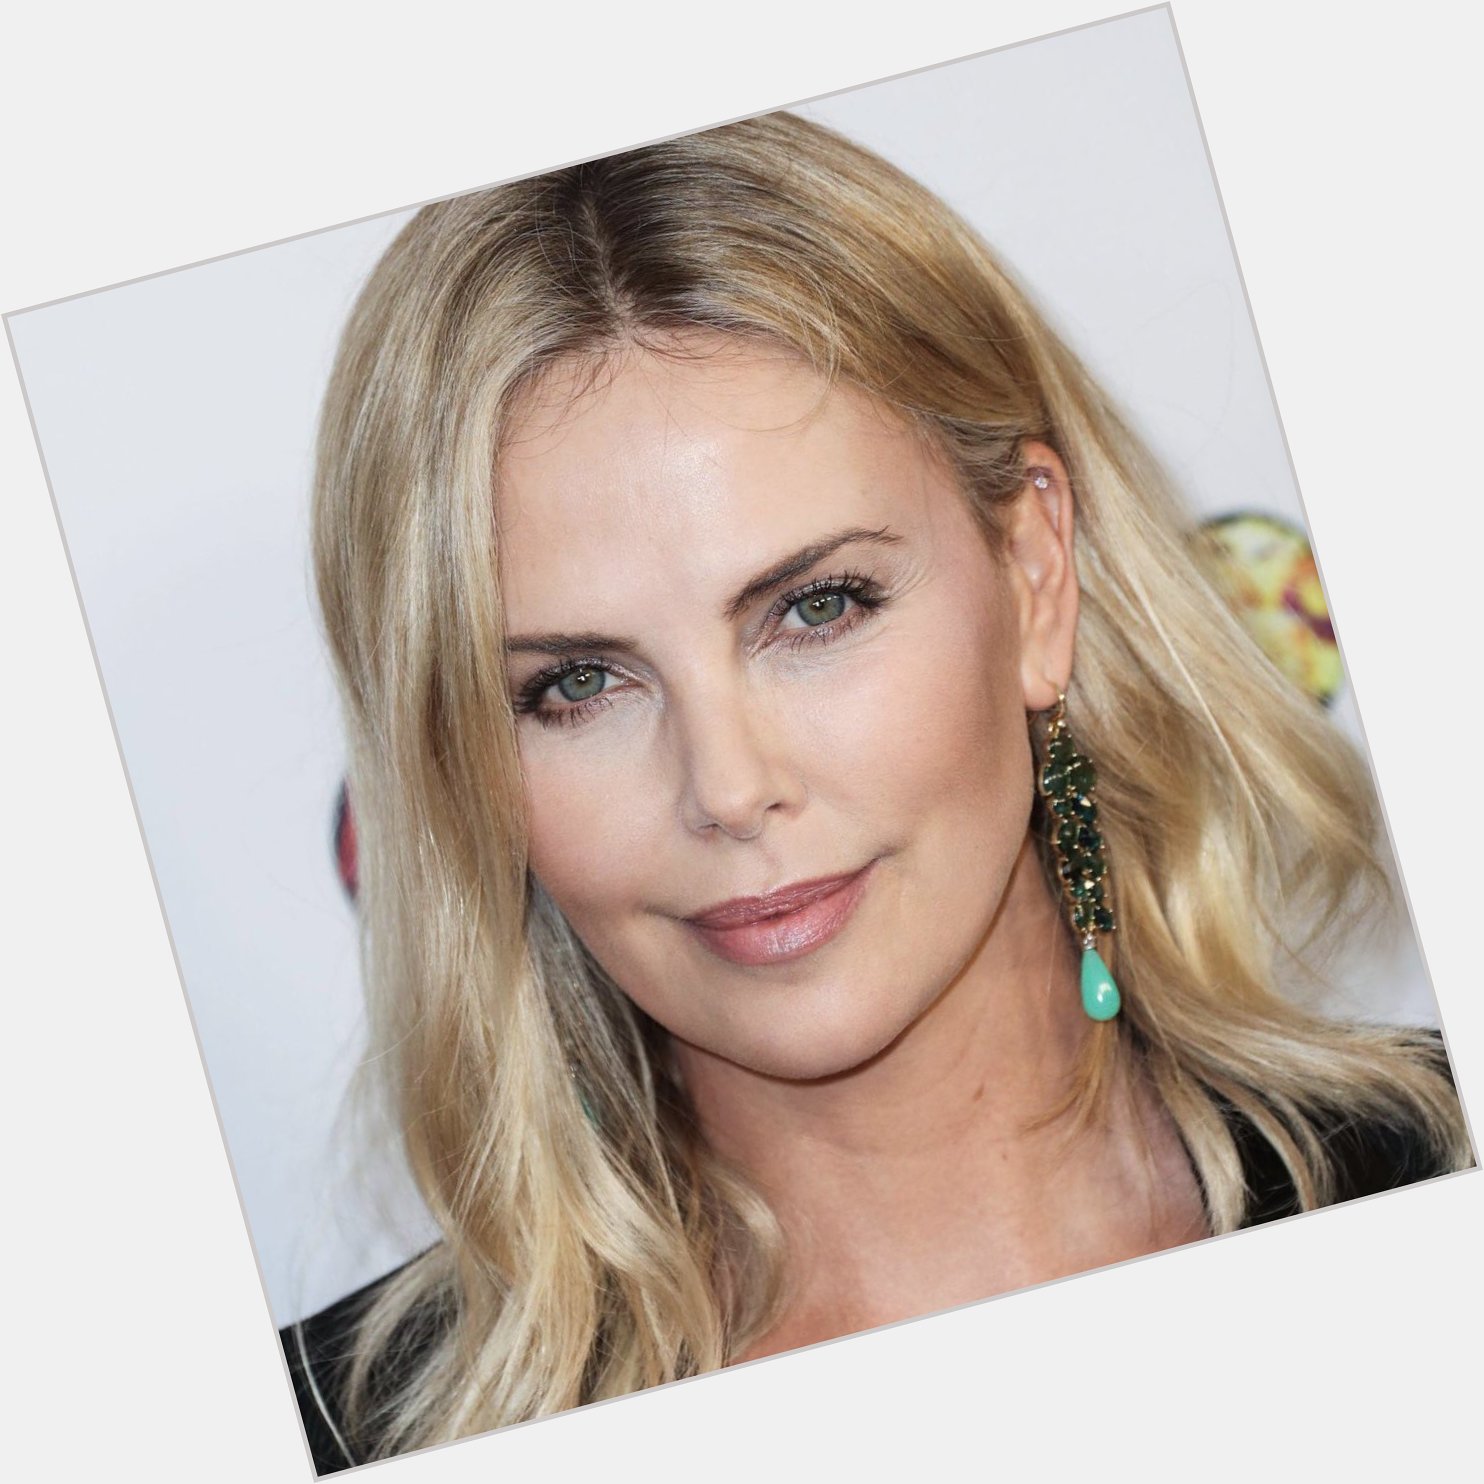 Wishing a very happy birthday to Charlize Theron today! 